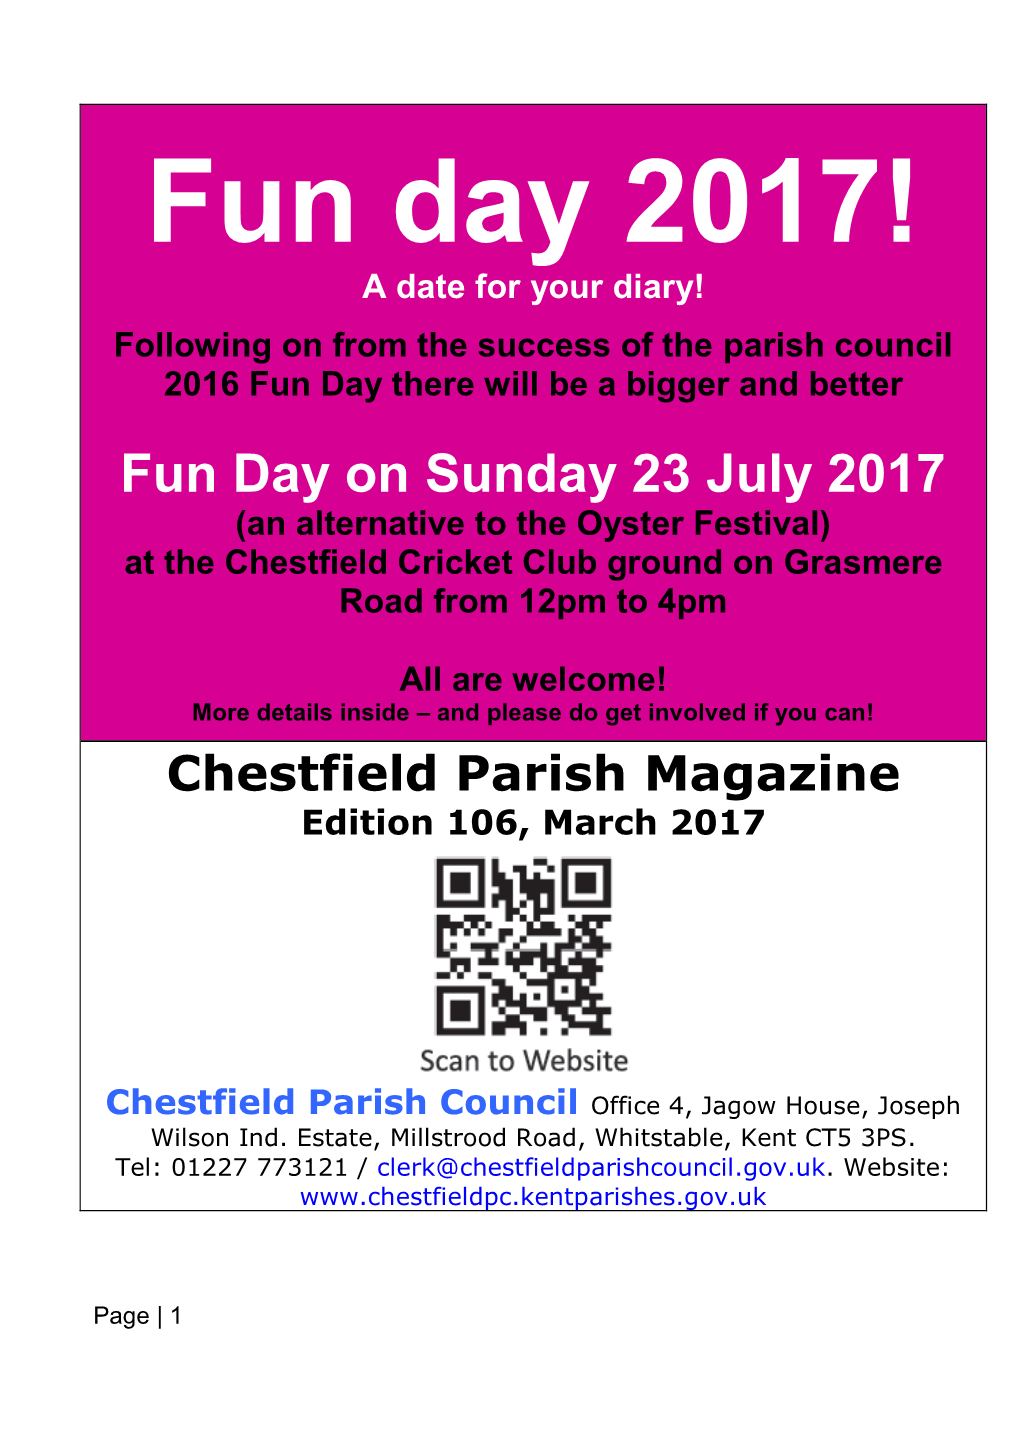 Fun Day 2017! a Date for Your Diary! Following on from the Success of the Parish Council 2016 Fun Day There Will Be a Bigger and Better